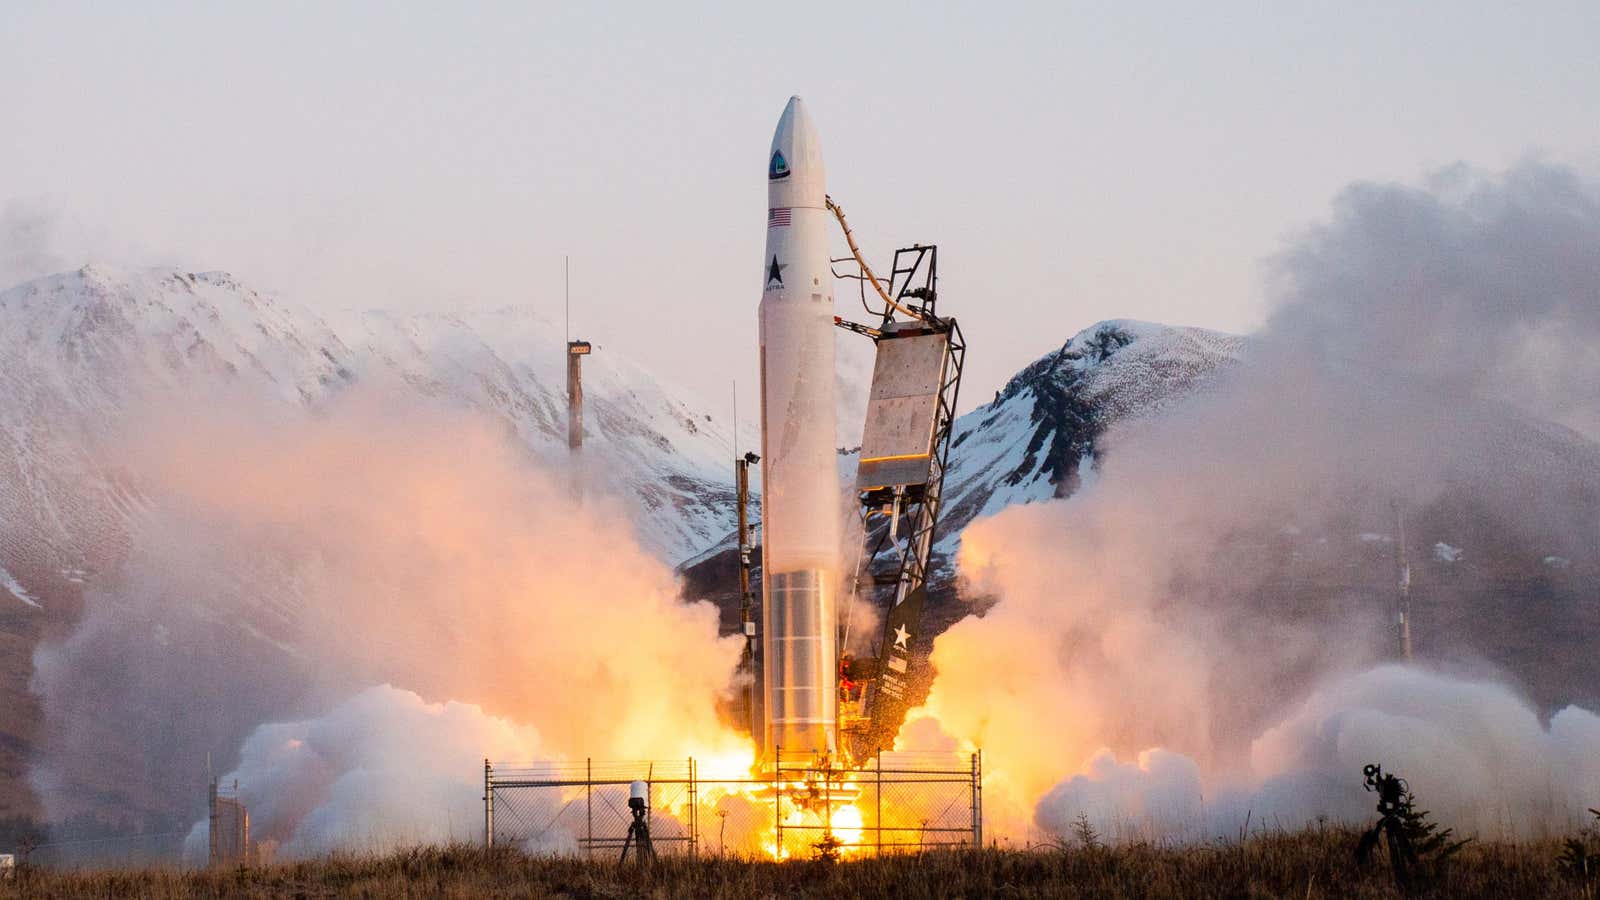 An Astra rocket launches the company’s first satellites in March 2022.